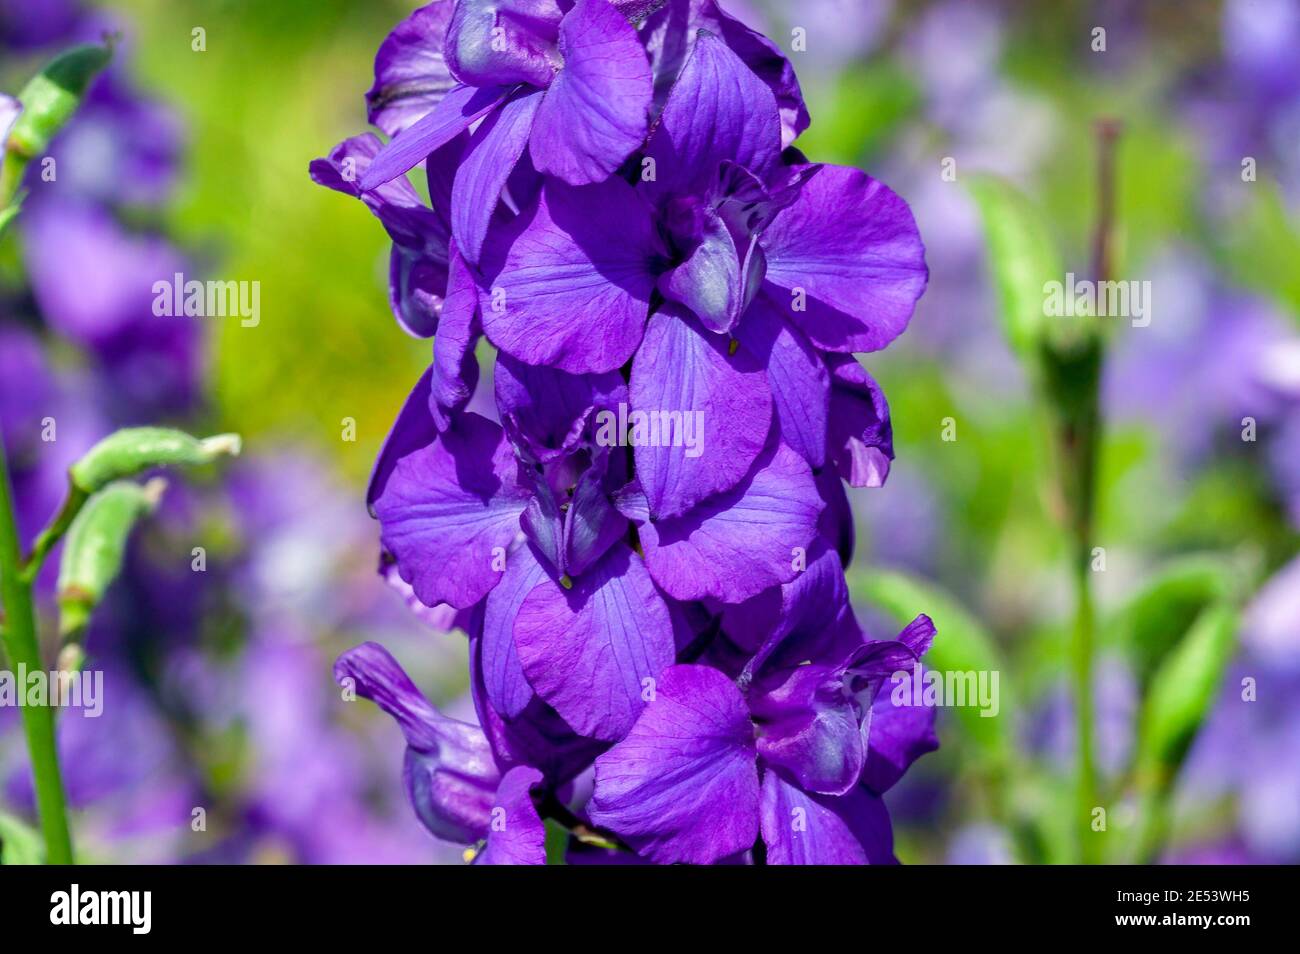 Consolida regalis var paniculatum a summer flowering plant with a purple blue summertime flower commonly known as larkspur, stock photo image Stock Photo